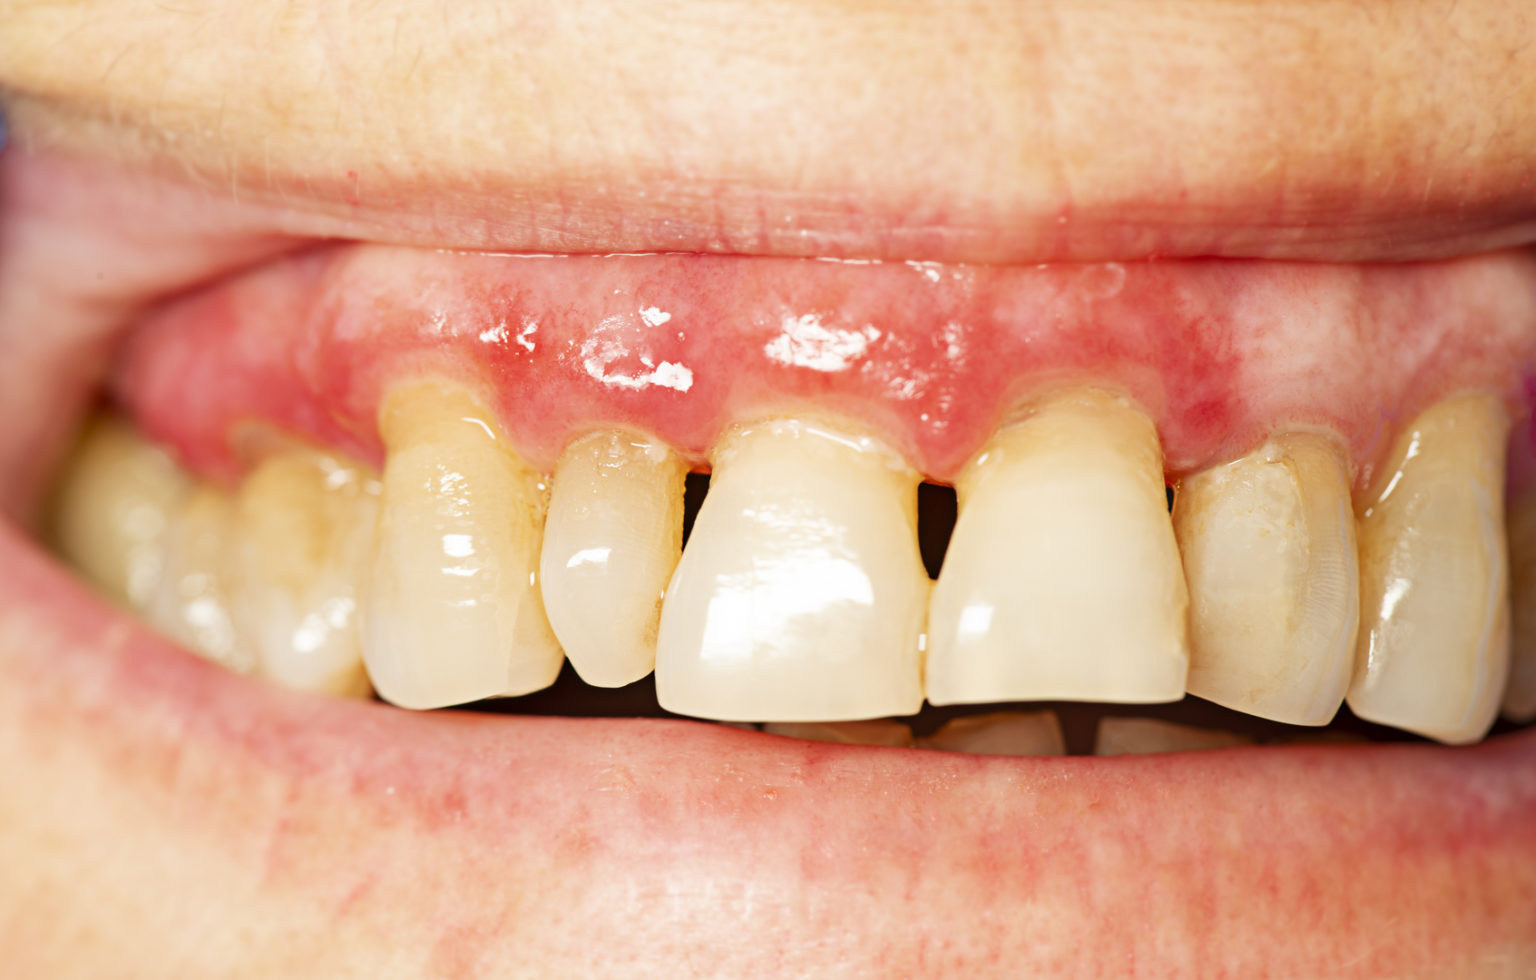 Upclose photo of patient with gum disease.